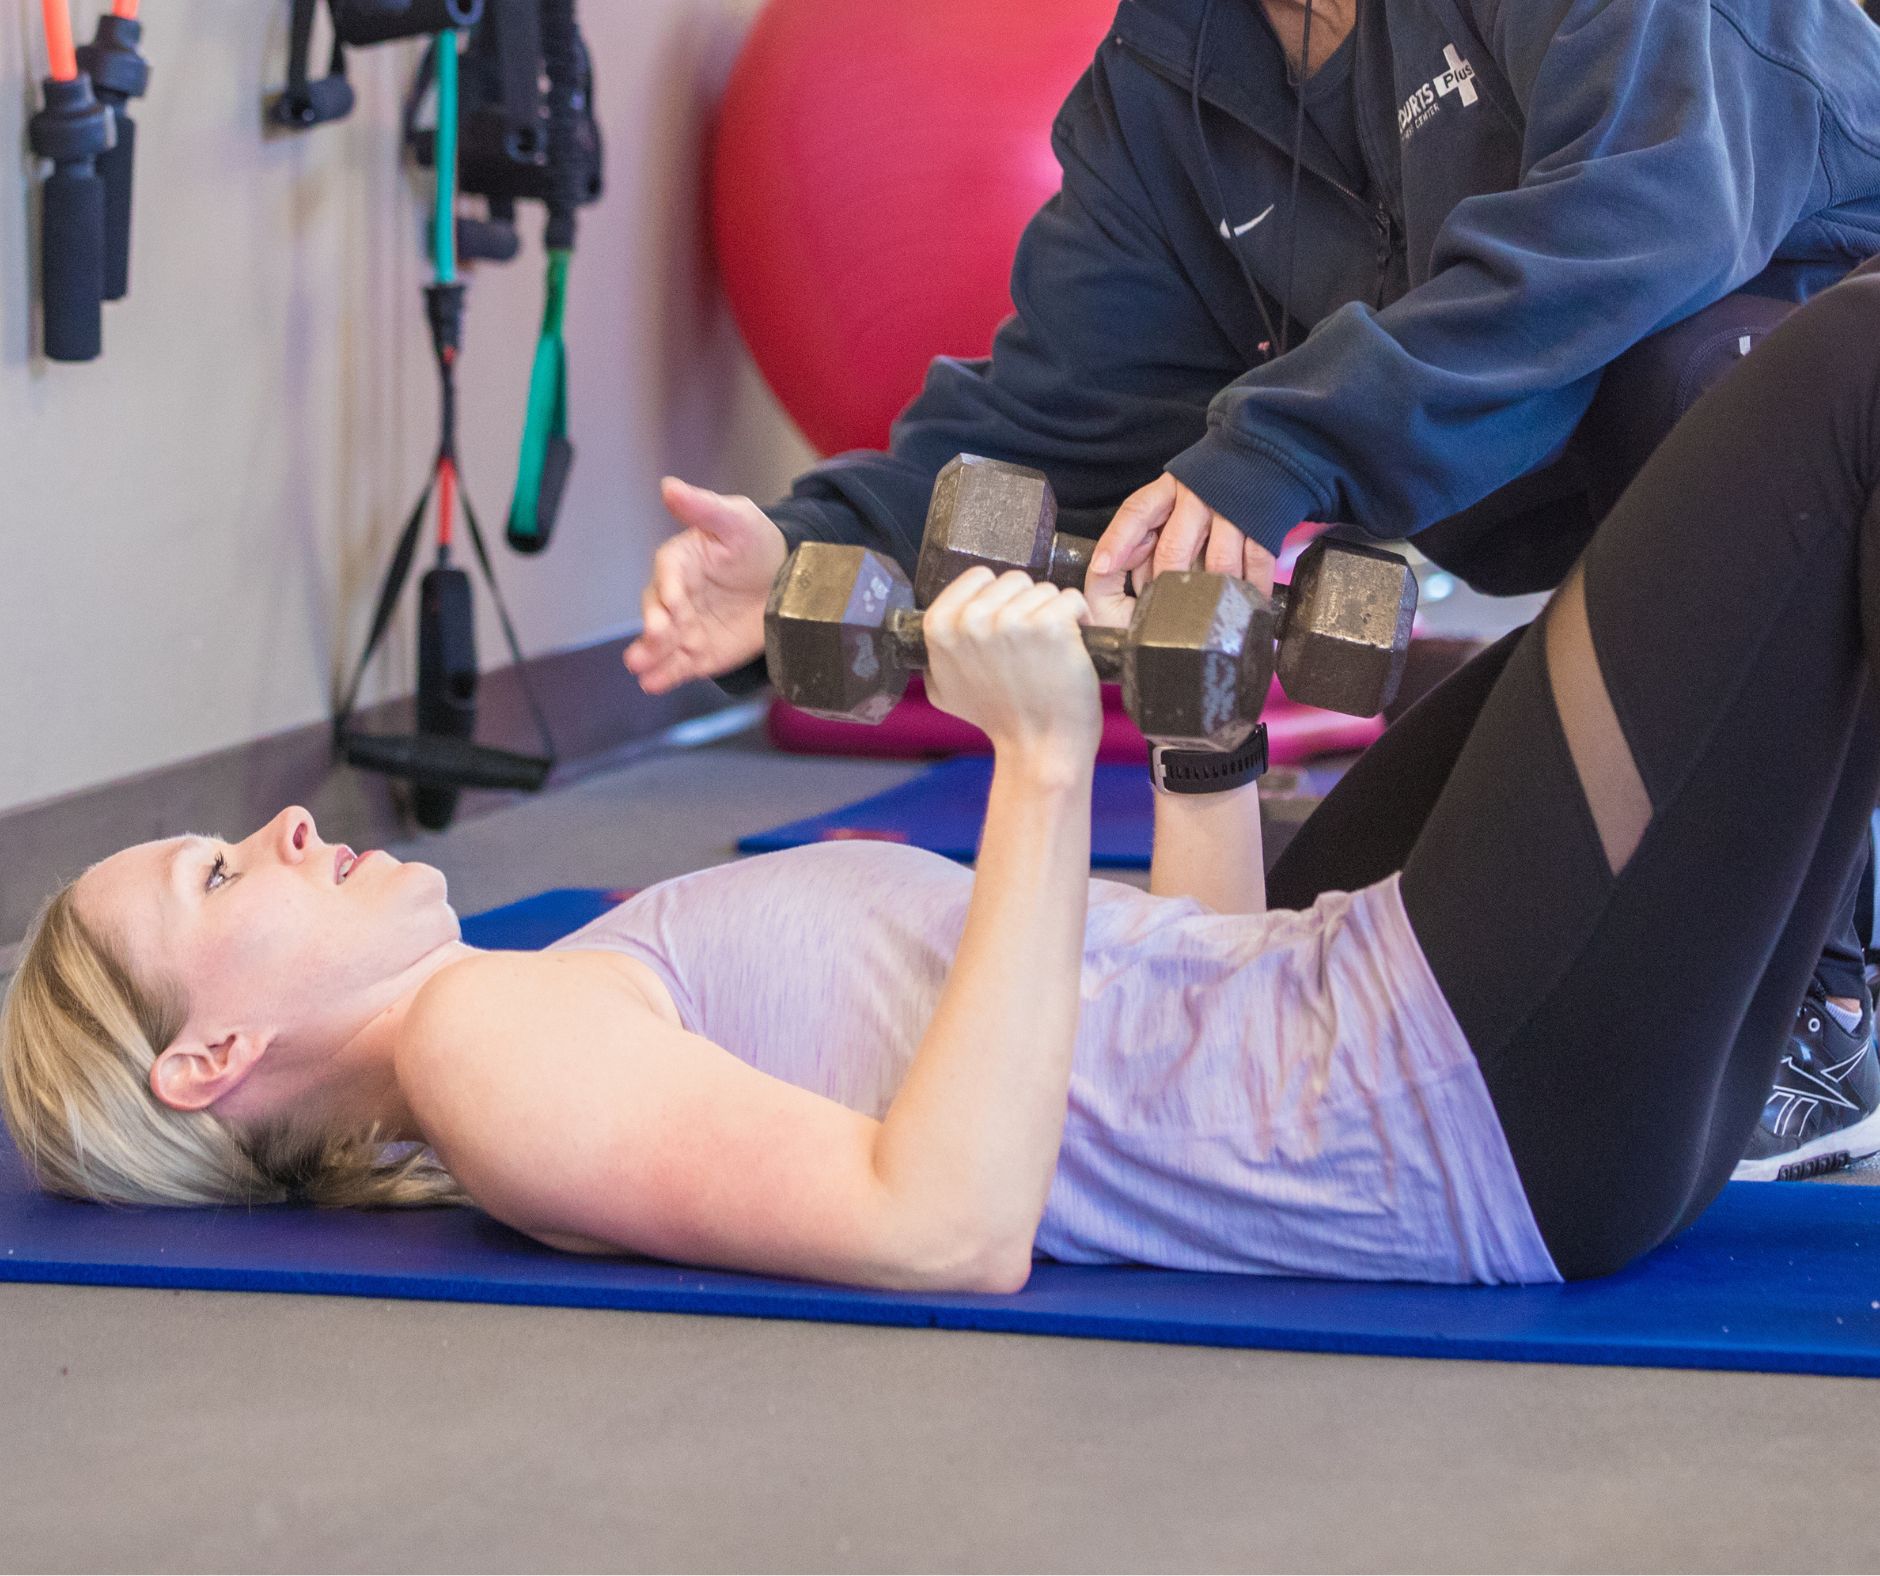 fitness centers often have a team of certified personal trainers available